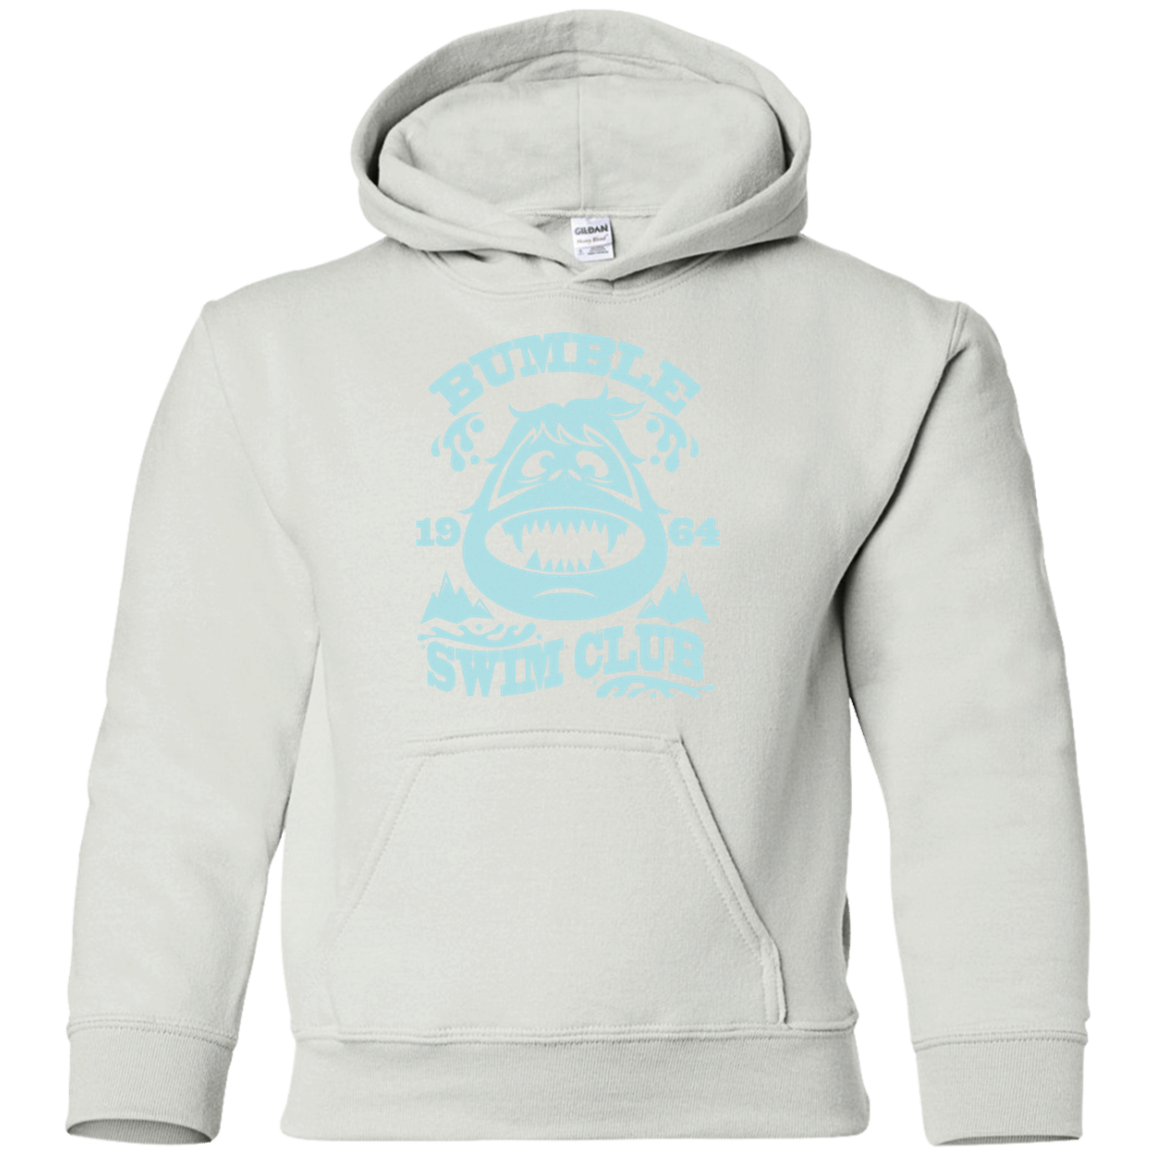 Bumble Club Youth Hoodie